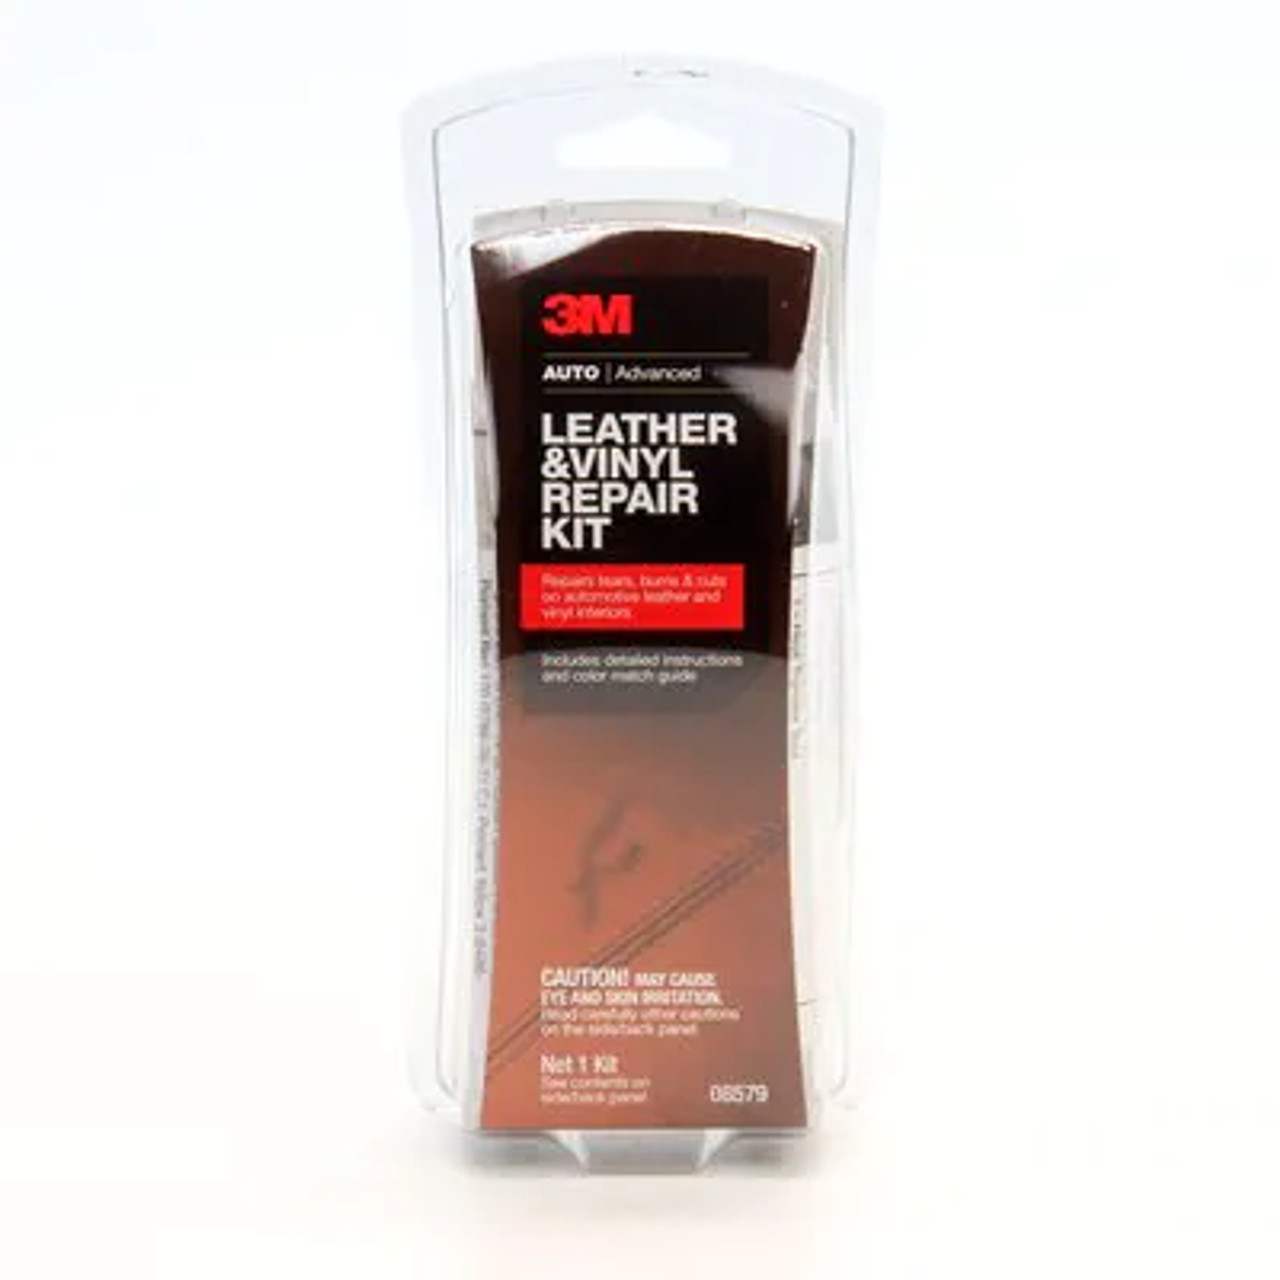 3M™ Leather and Vinyl Repair Kit, 08579 - The Binding Source